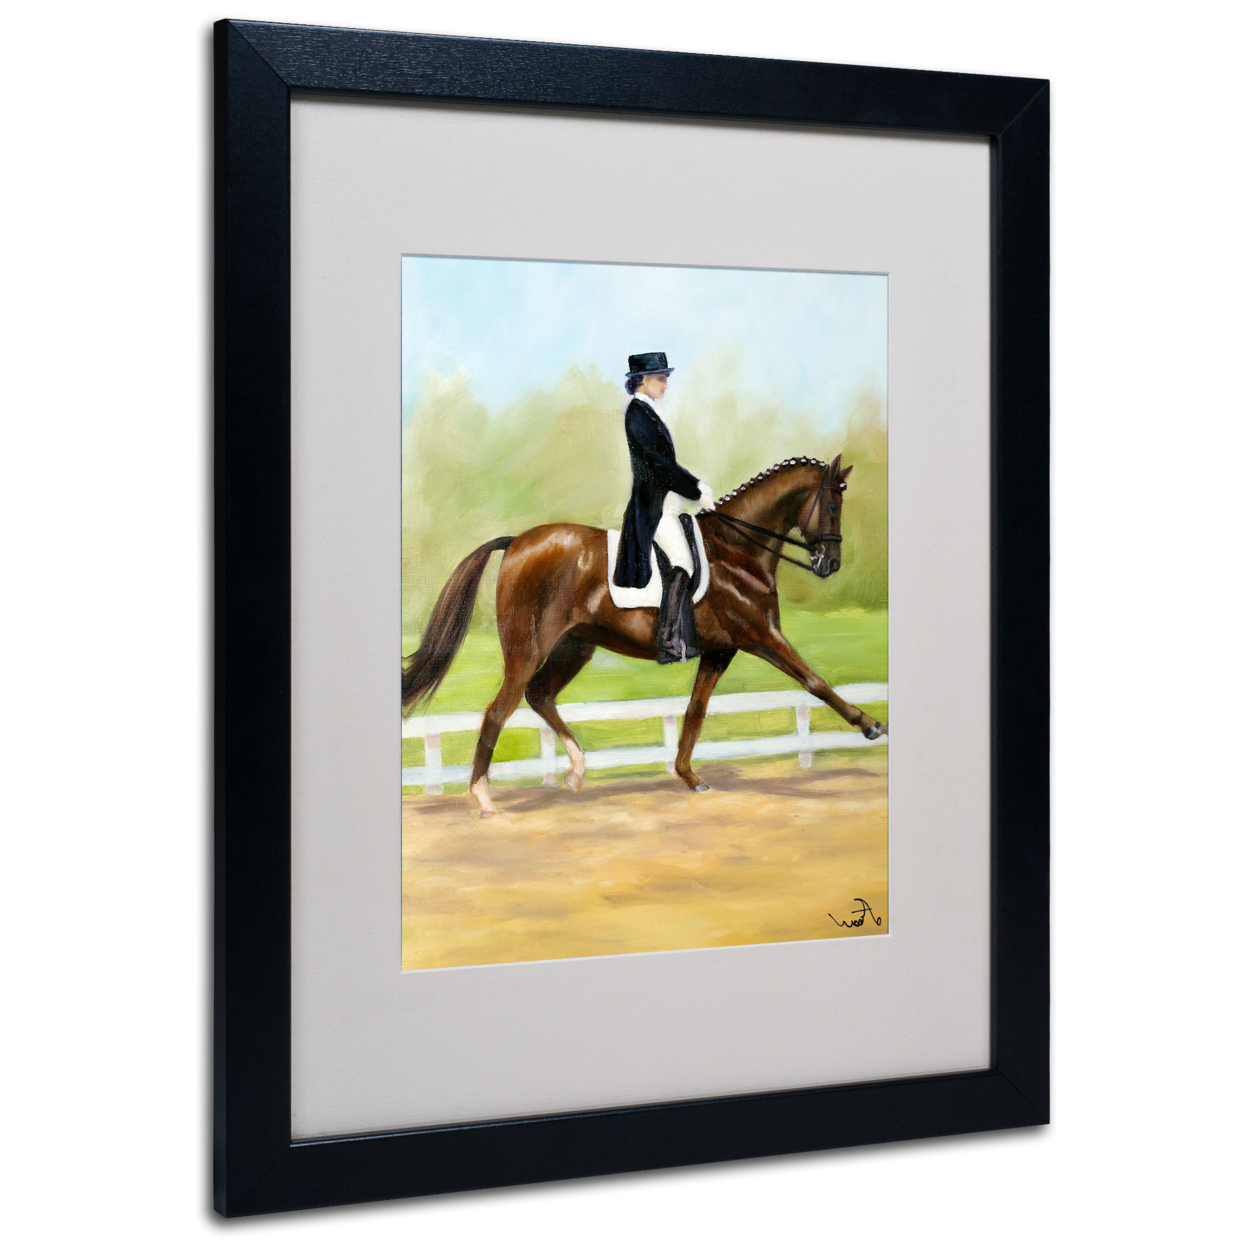 Michelle Moate 'Horse Of Sport IV' Black Wooden Framed Art 18 X 22 Inches